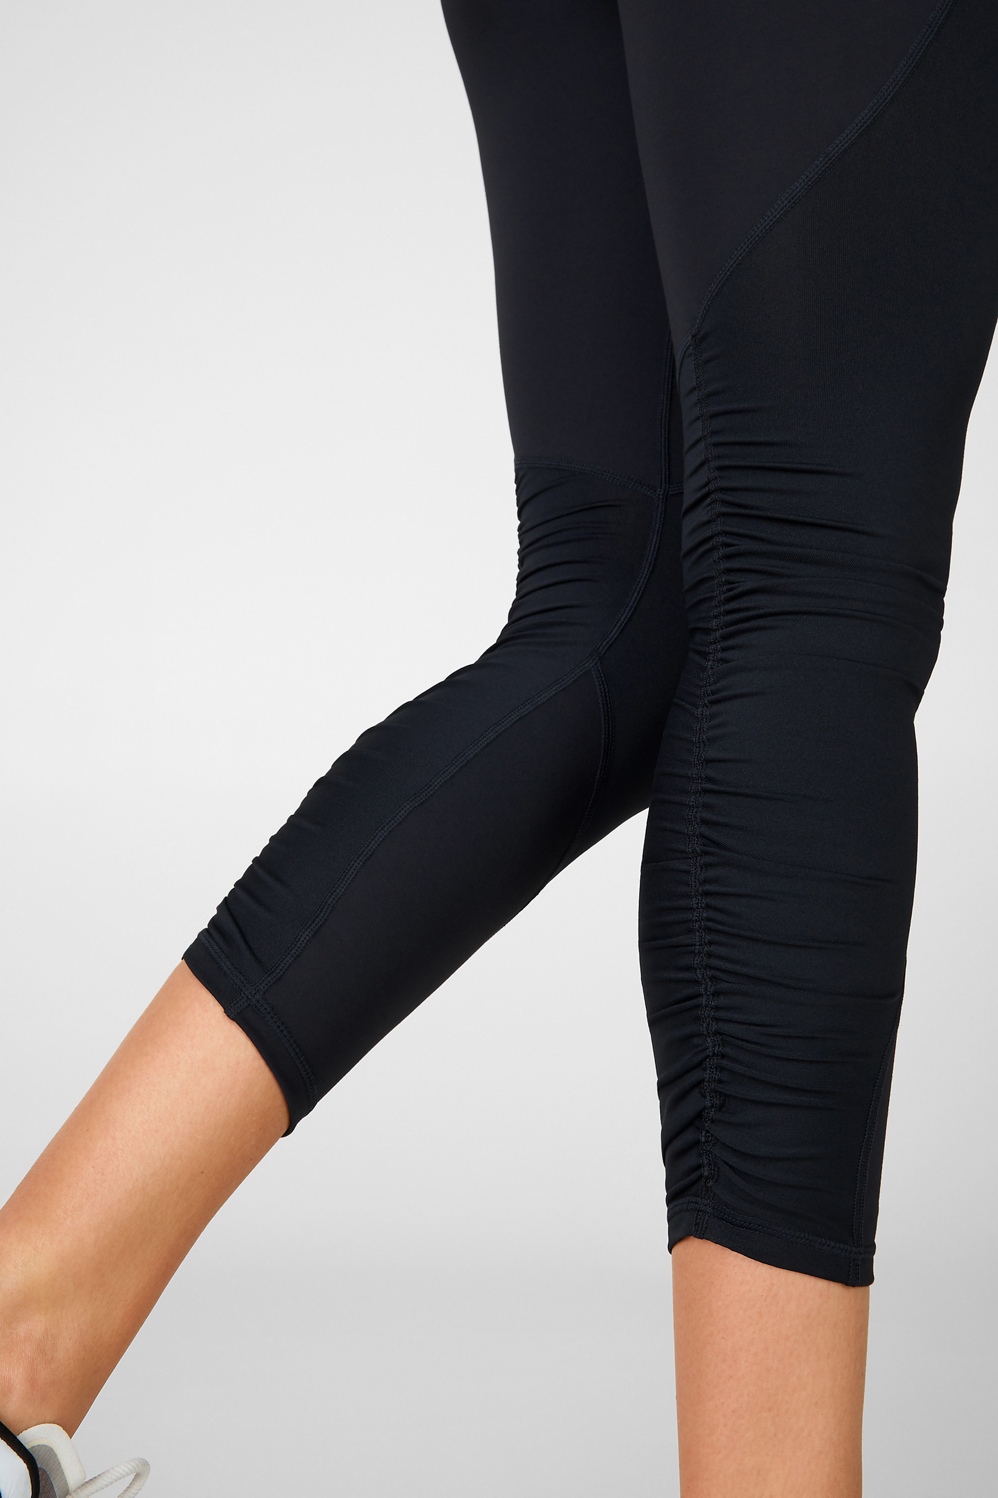 High-Waisted Ruched 7/8 Legging for Women